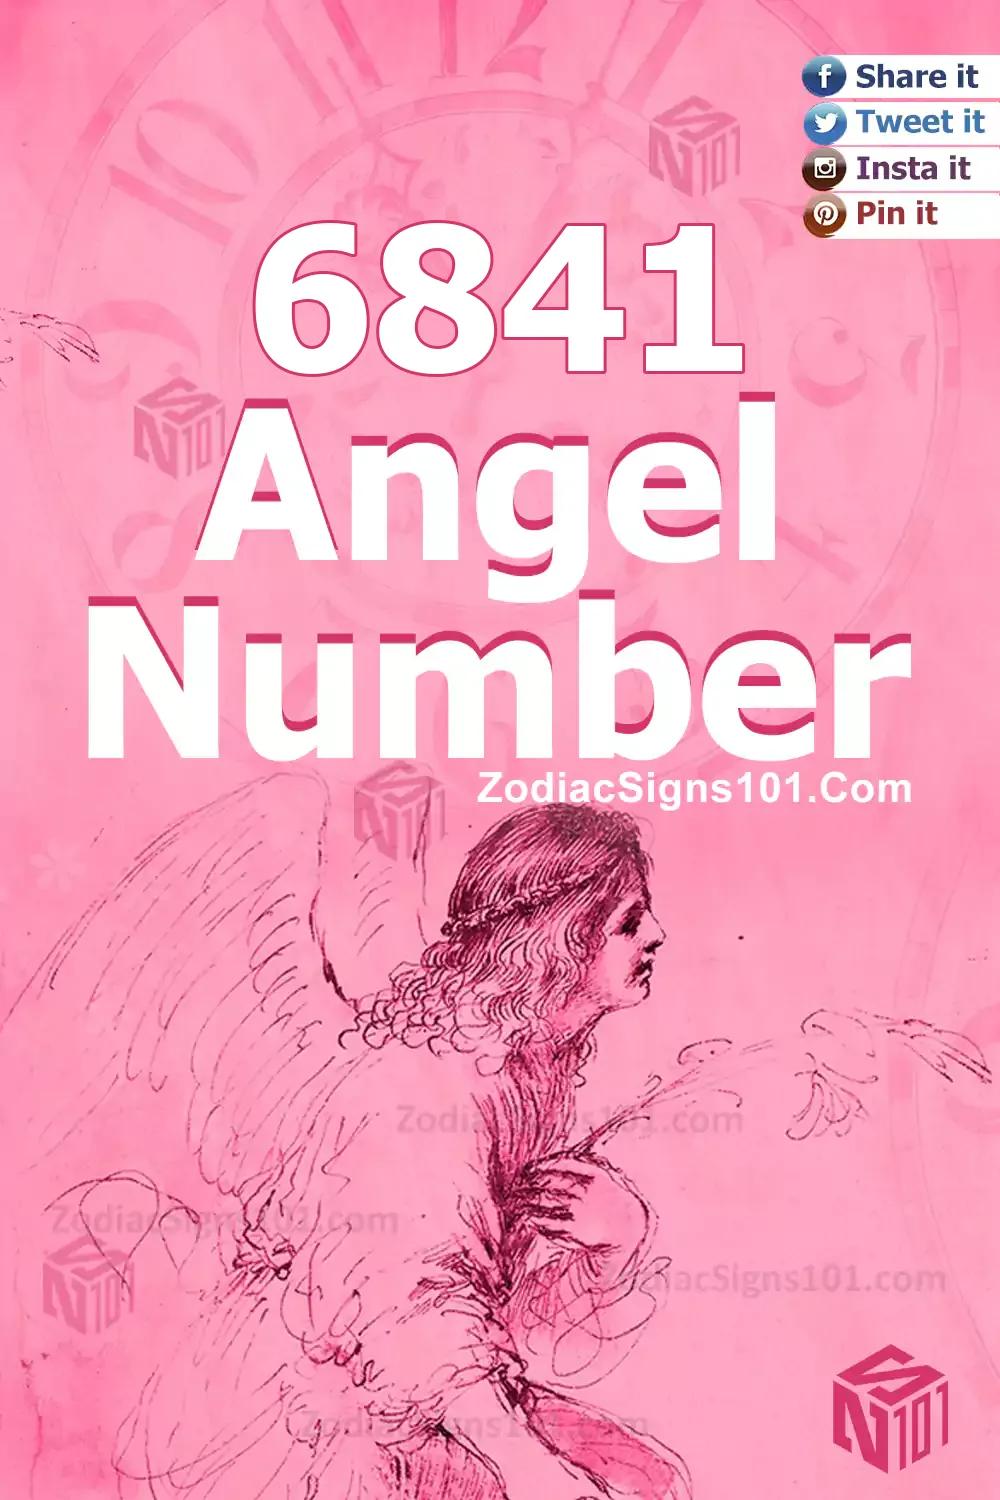 6841 Angel Number Meaning